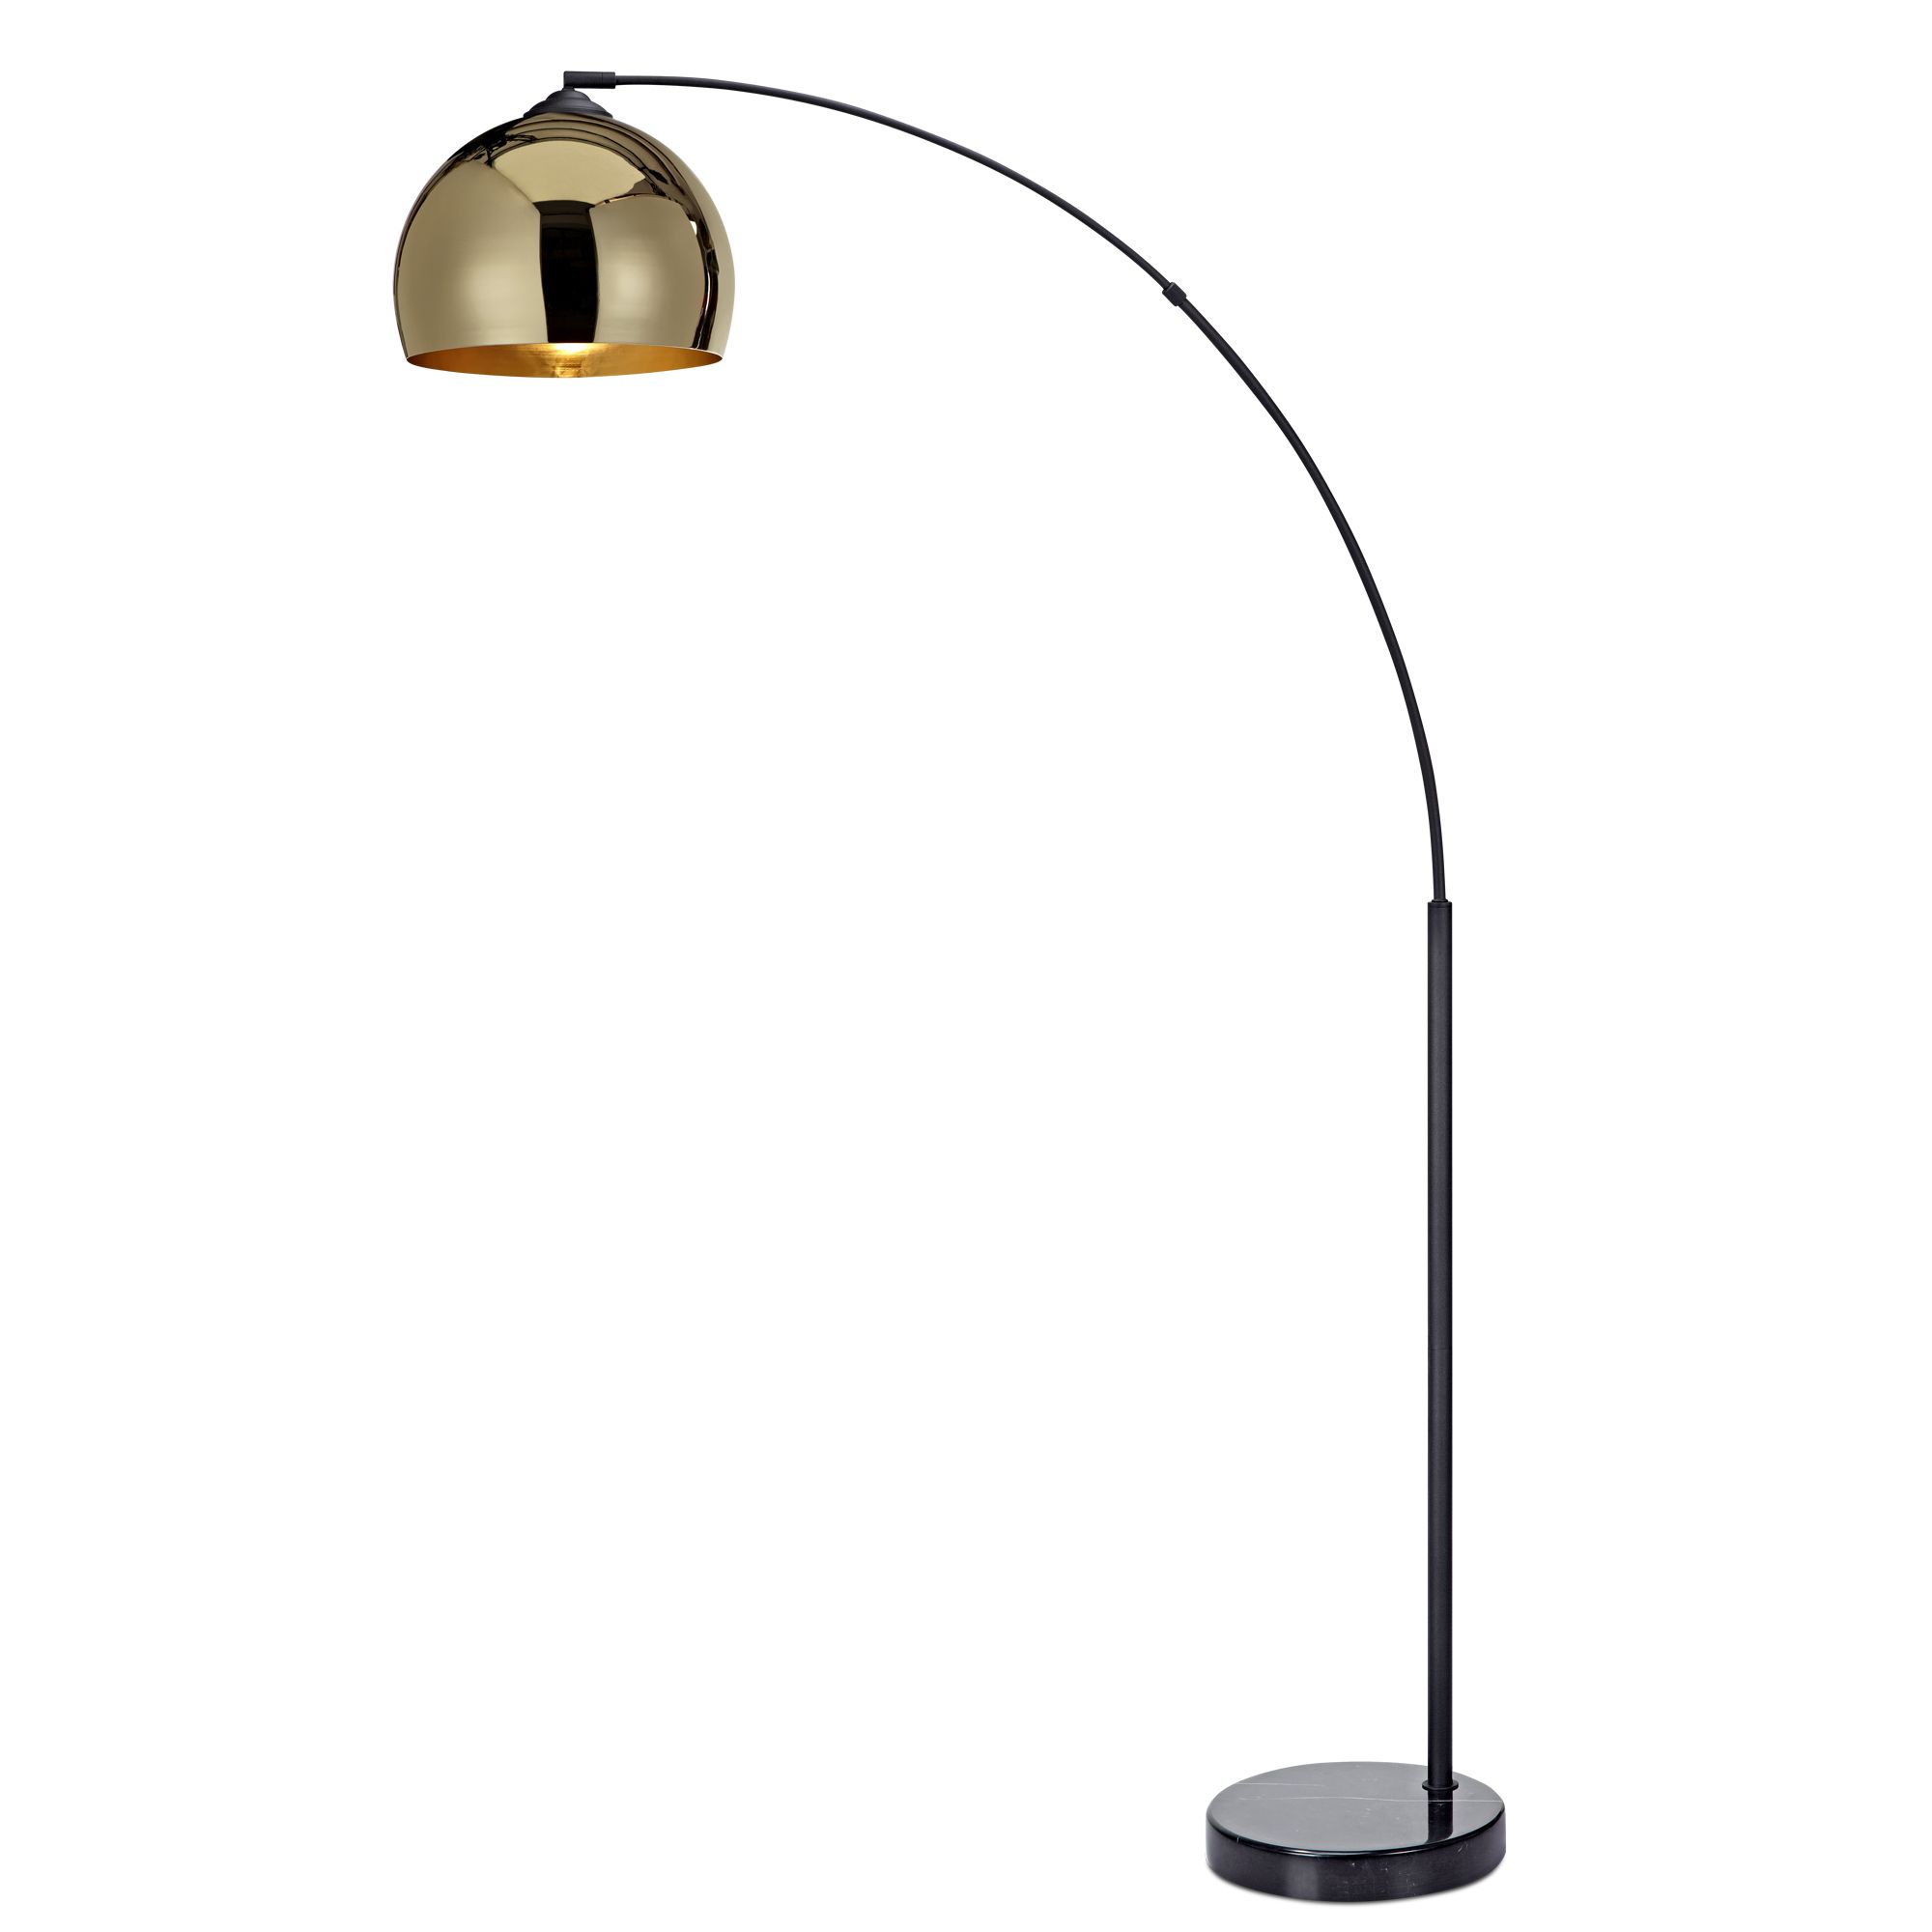 Teamson Home Arquer Arc 66.93" Metal Floor Lamp with Bell Shade, Gold 13+ Years | Walmart (US)